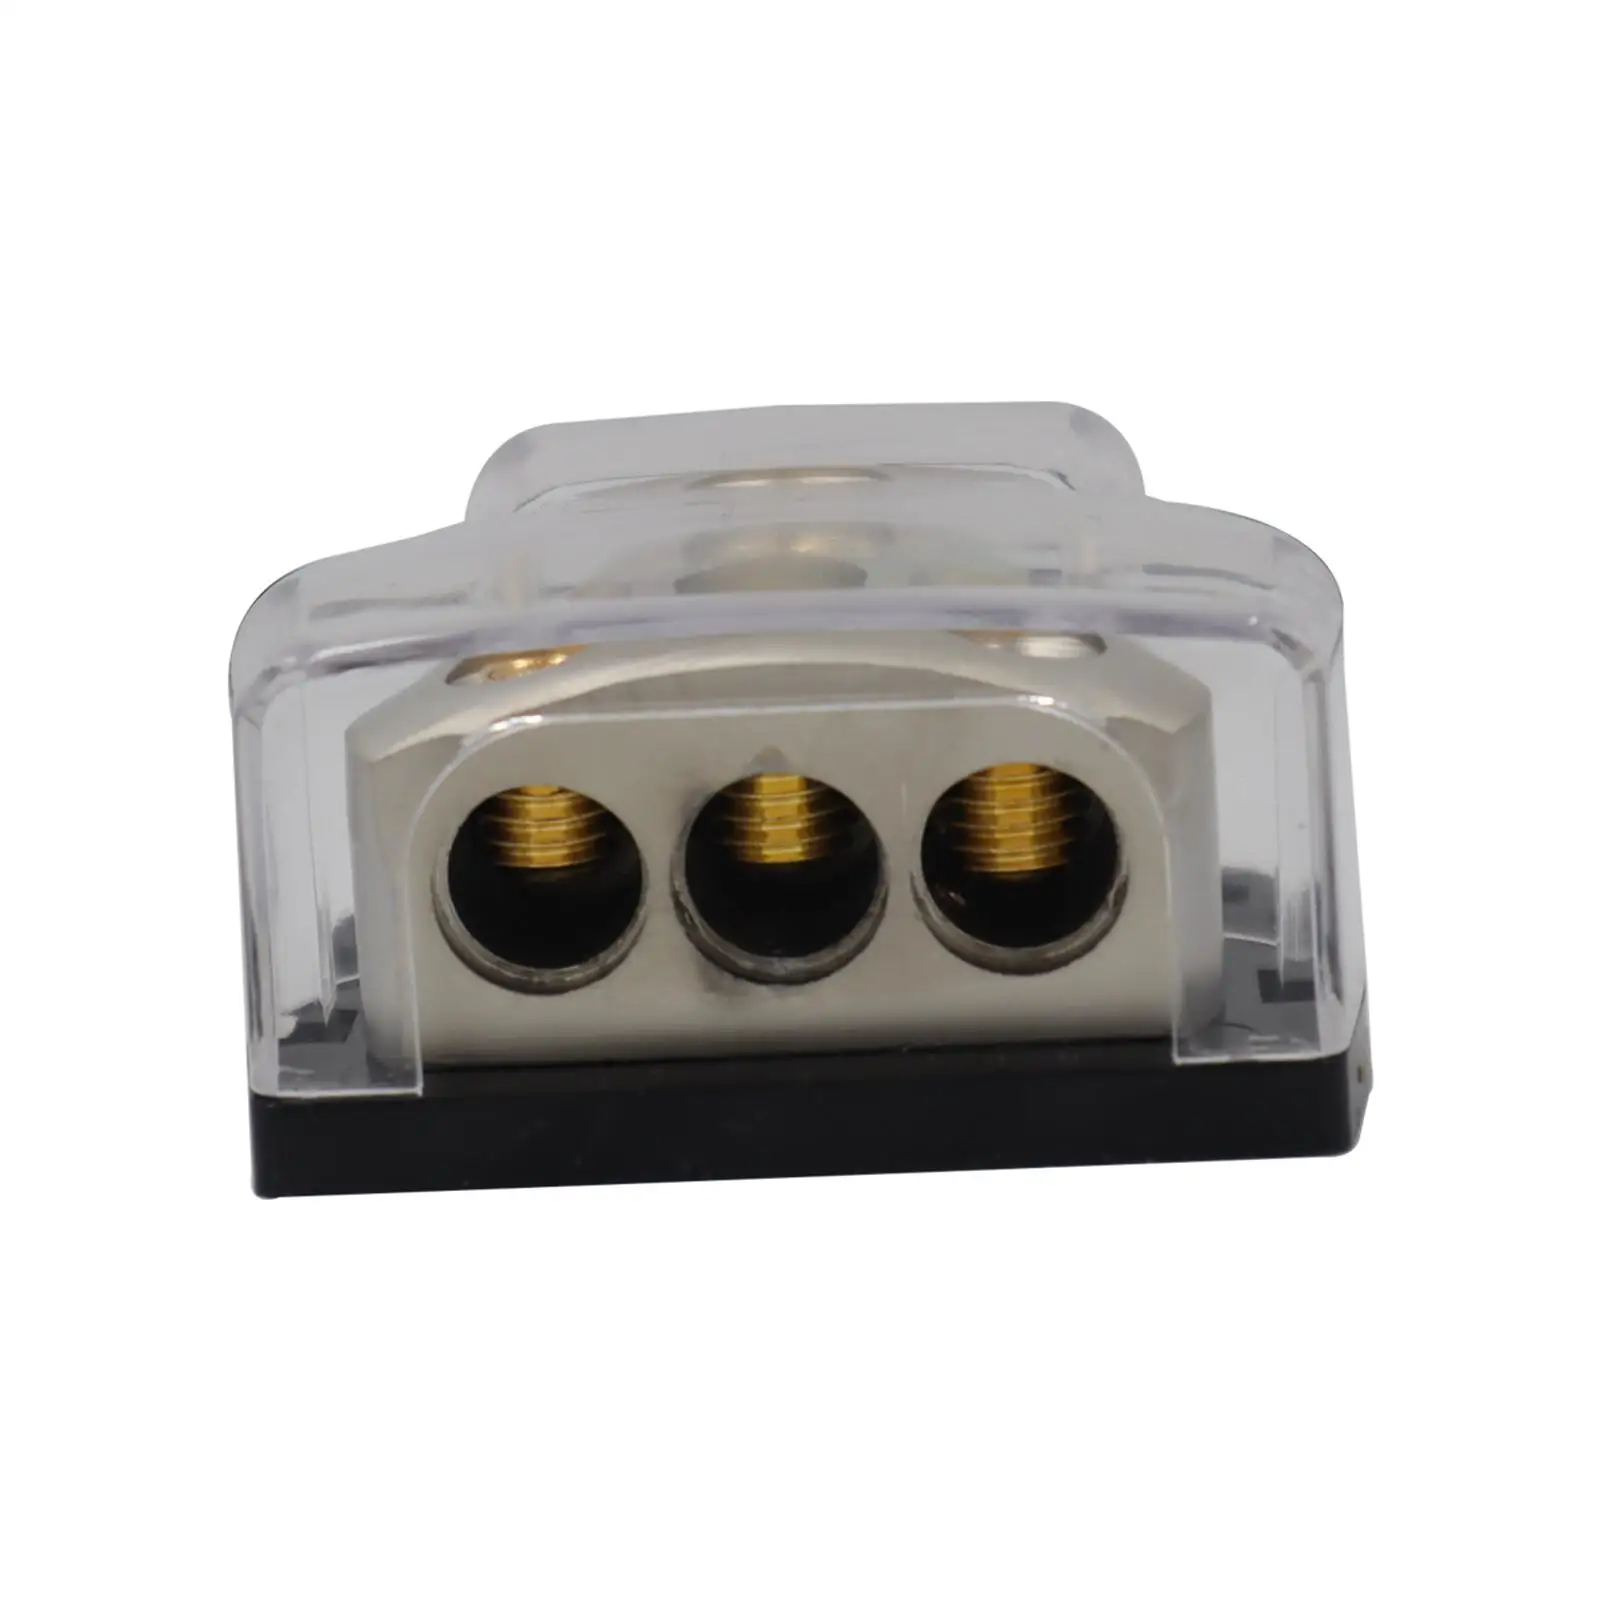 3 Way Amp Power Ground Distributor Connecting Block 1x 0 Gauge in 3x 4 Gauge Out Fit for Car Audio Amplifier Connection Replace